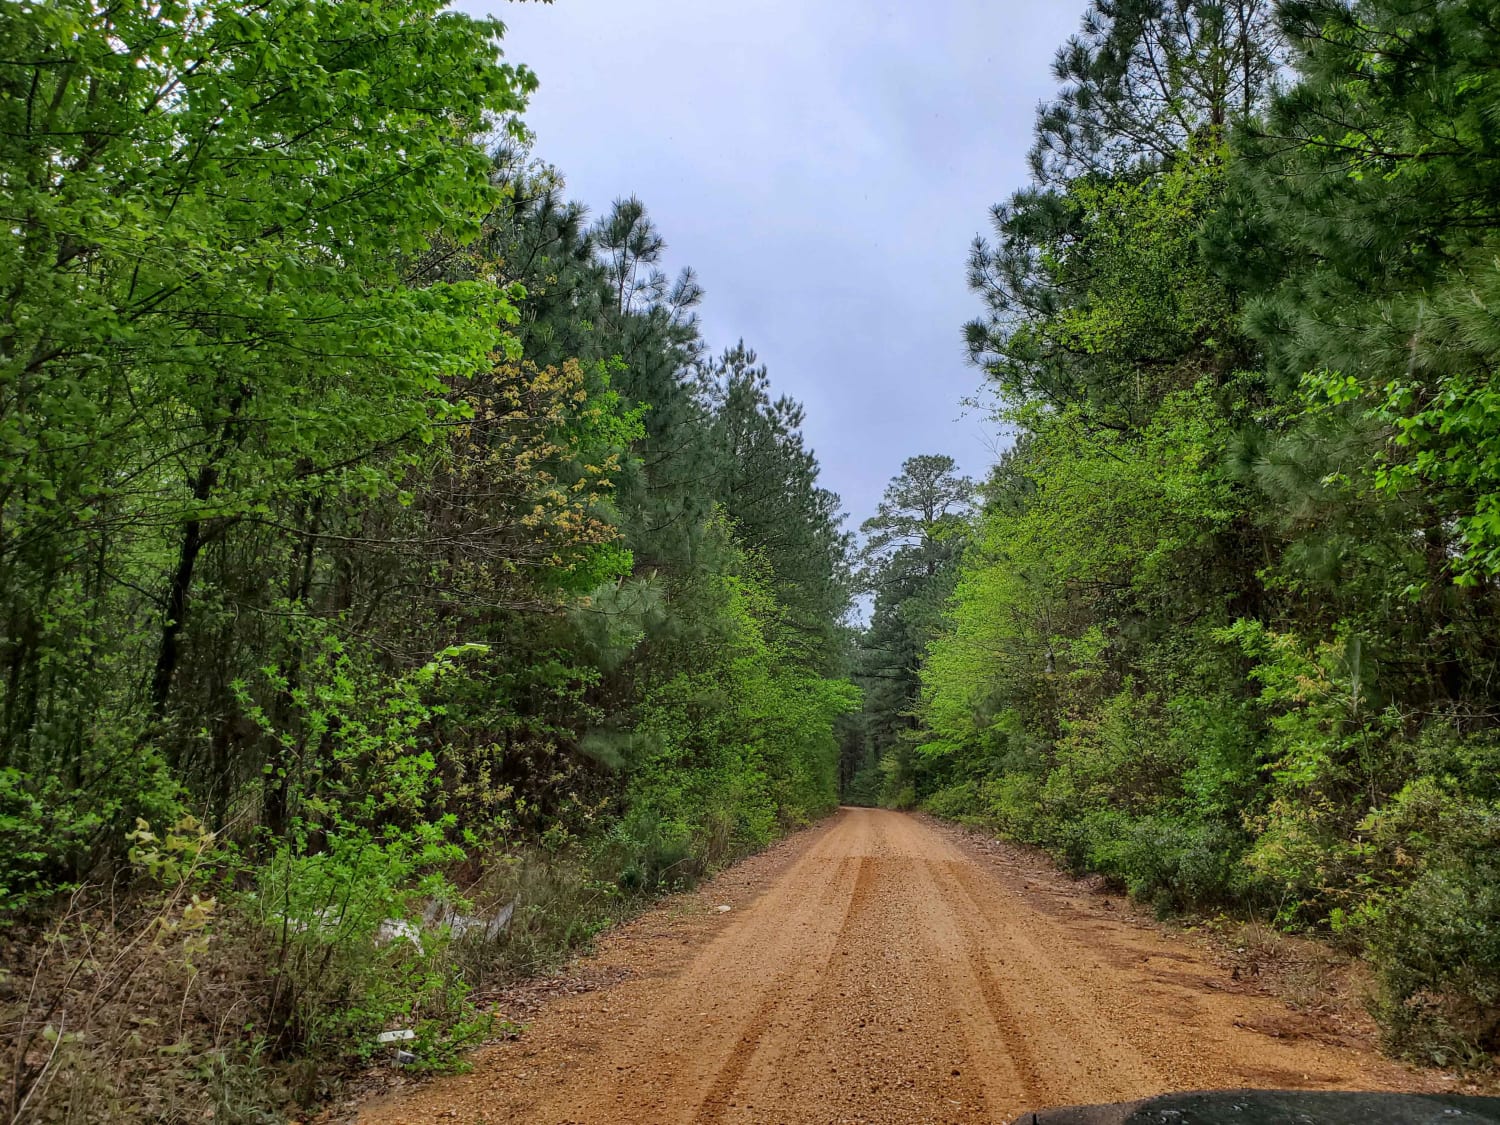 The Arkansas Overland Route - Section 5 - Highway 76 to Highway 278